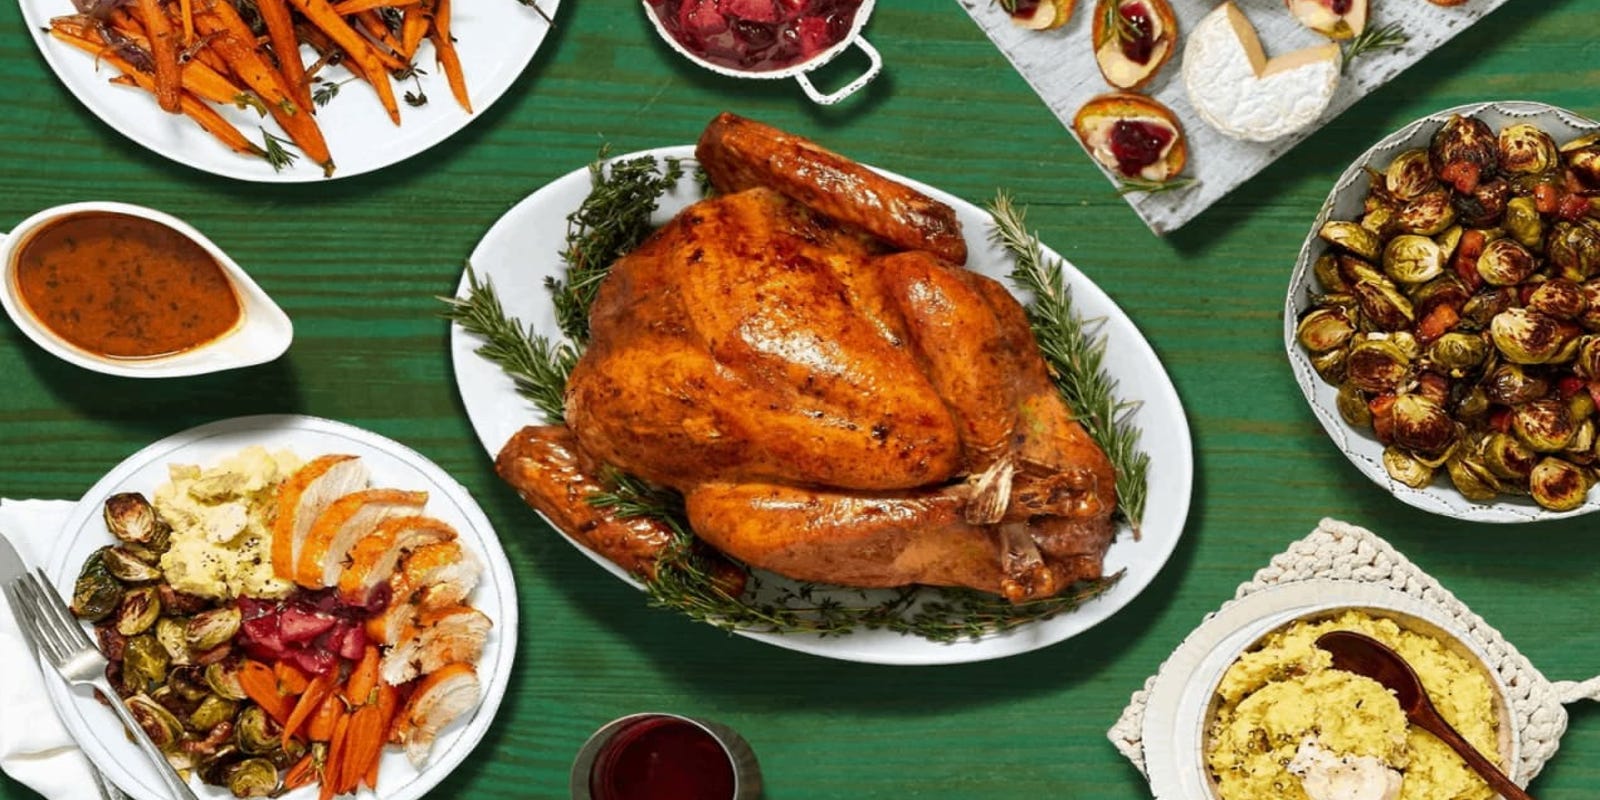 Now's your last chance to get these Thanksgiving meal kits